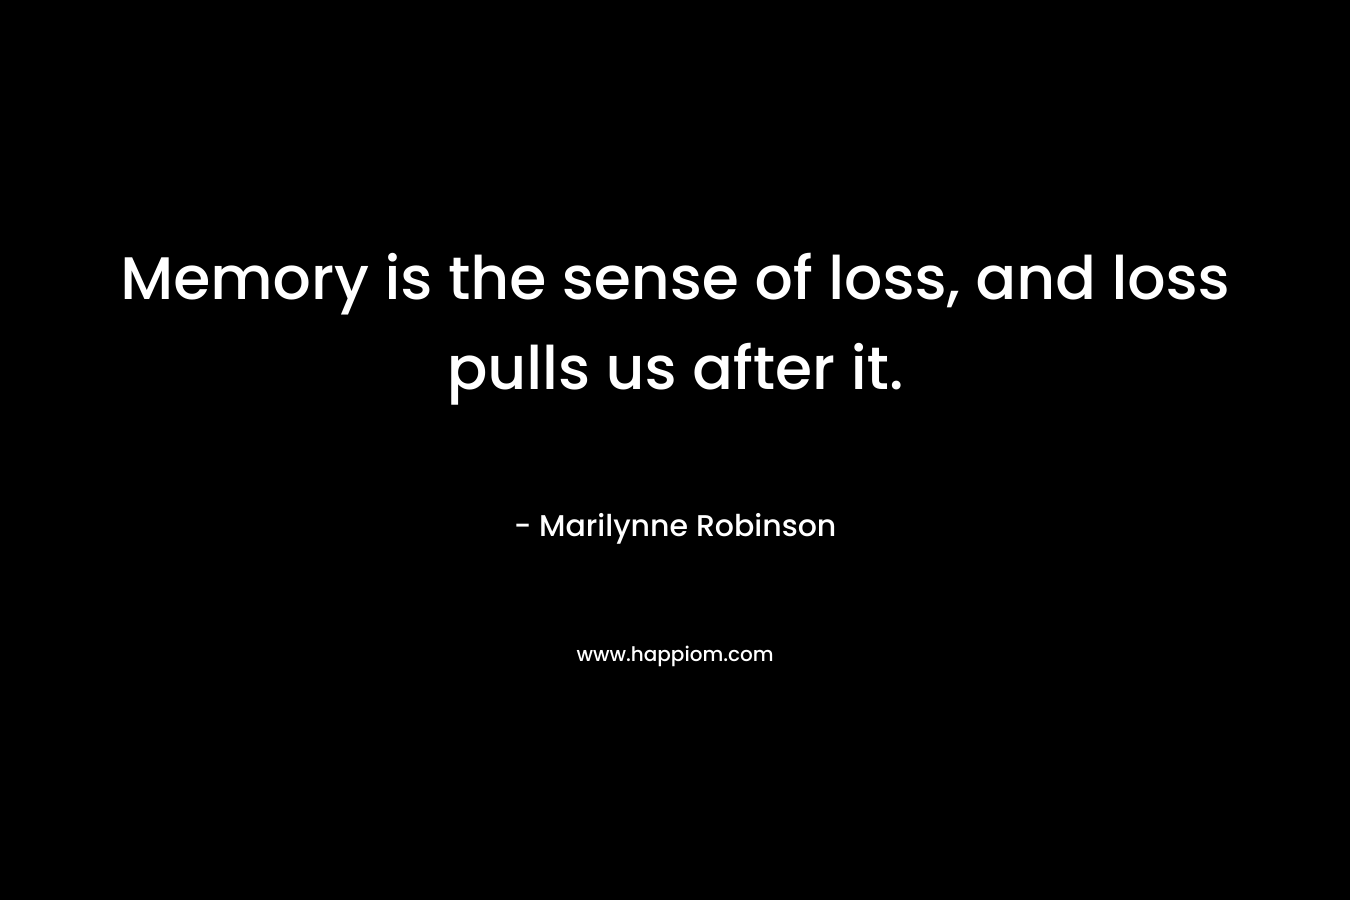 Memory is the sense of loss, and loss pulls us after it.